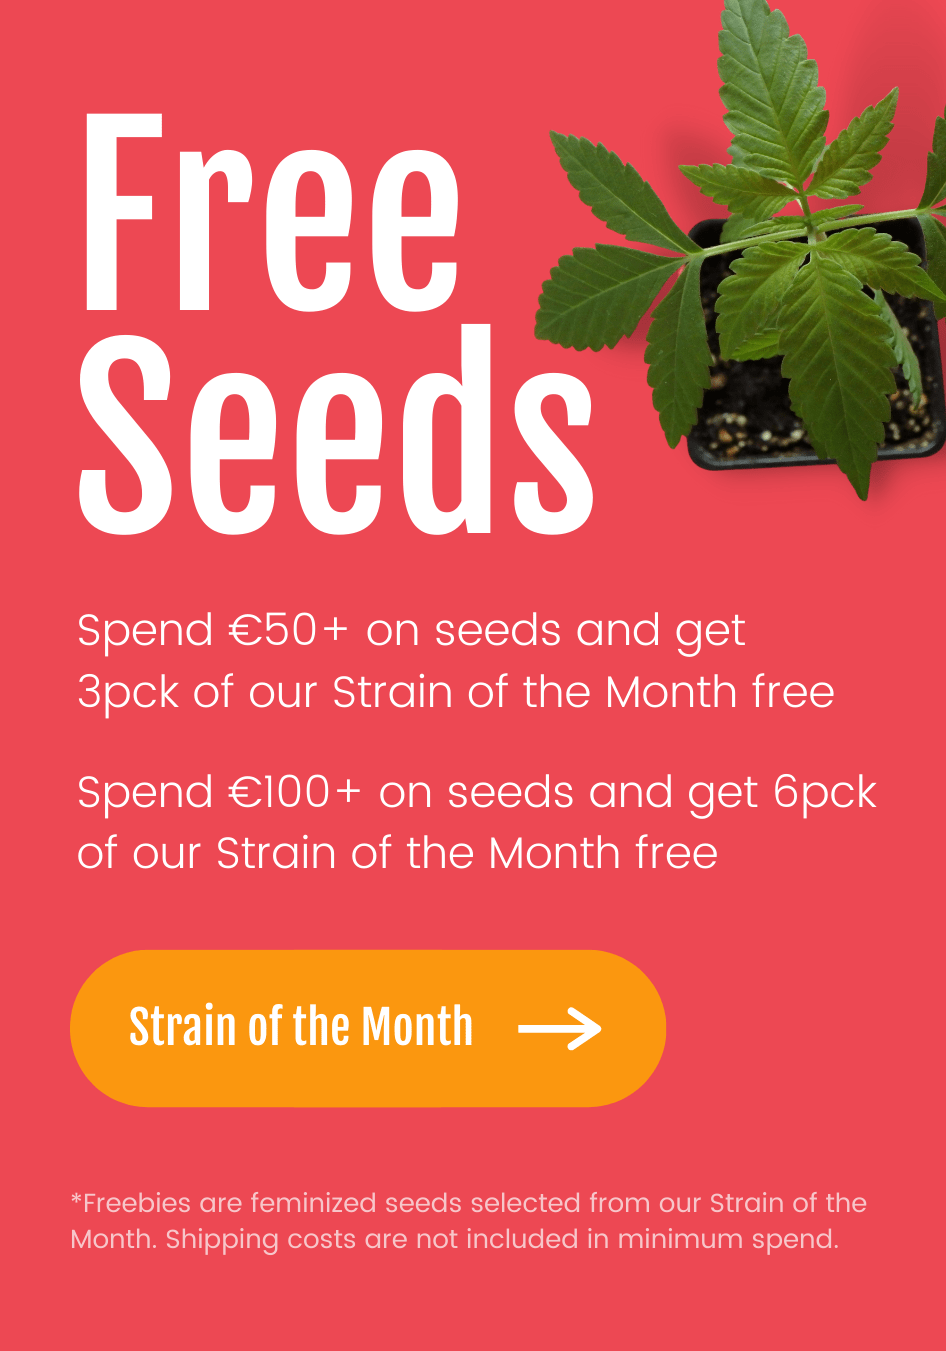 Spend €50+ on seeds and get 3pck of feminized Strain of the Month seeds free